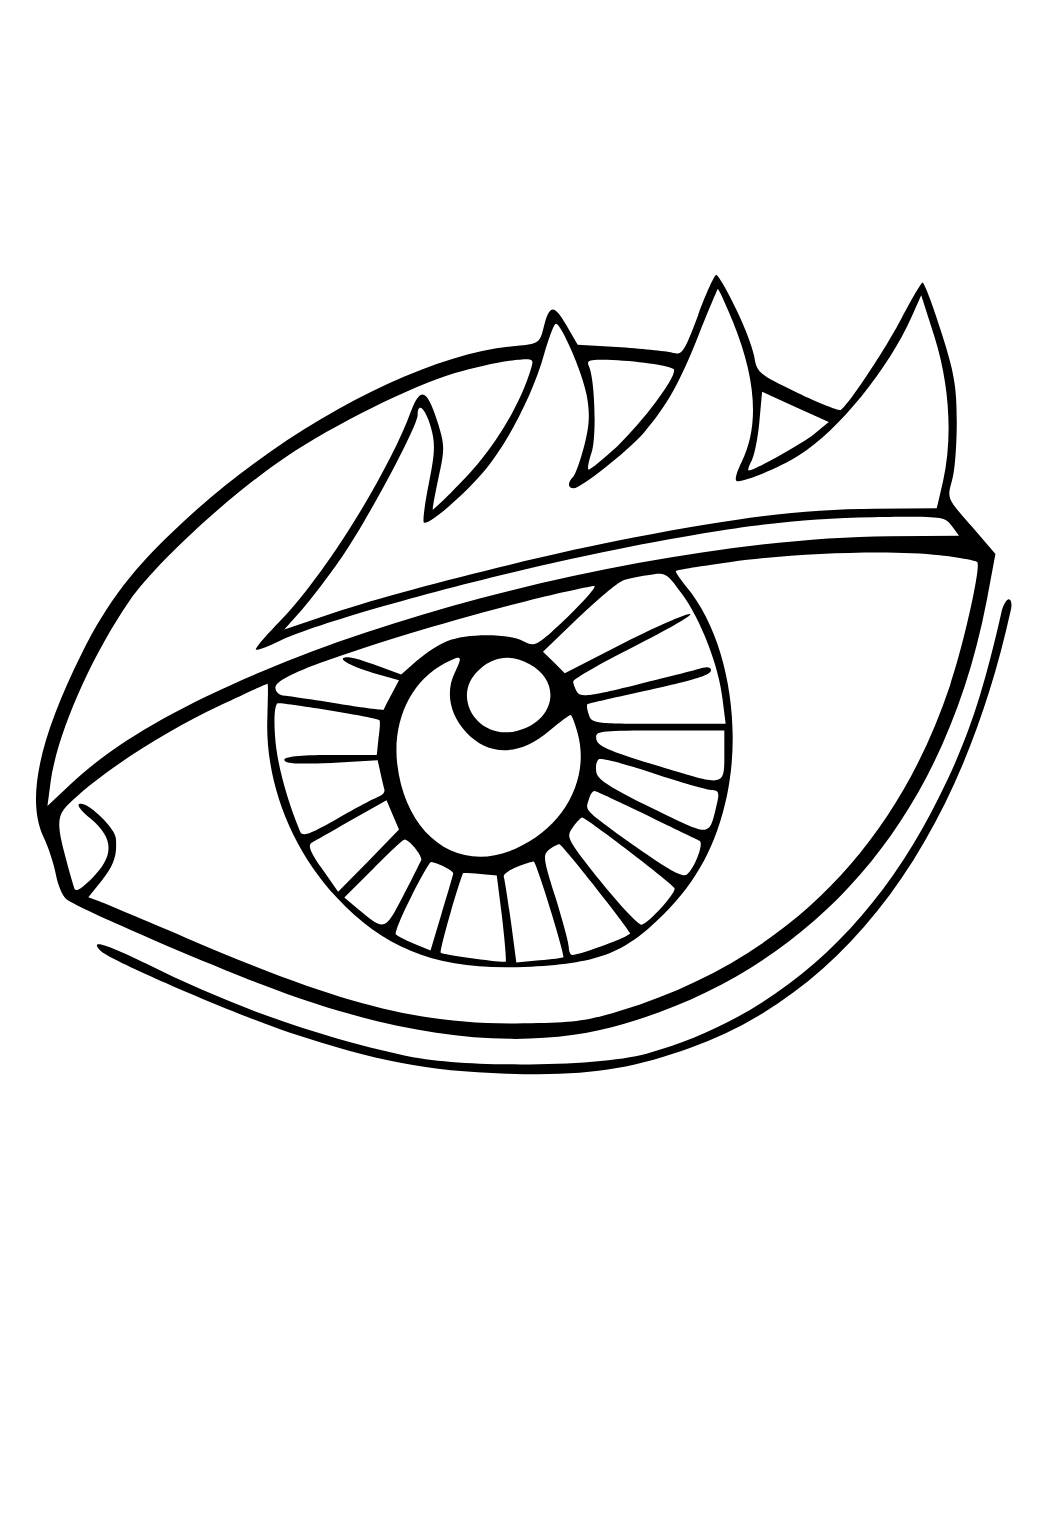 Free printable eye easy coloring page for adults and kids